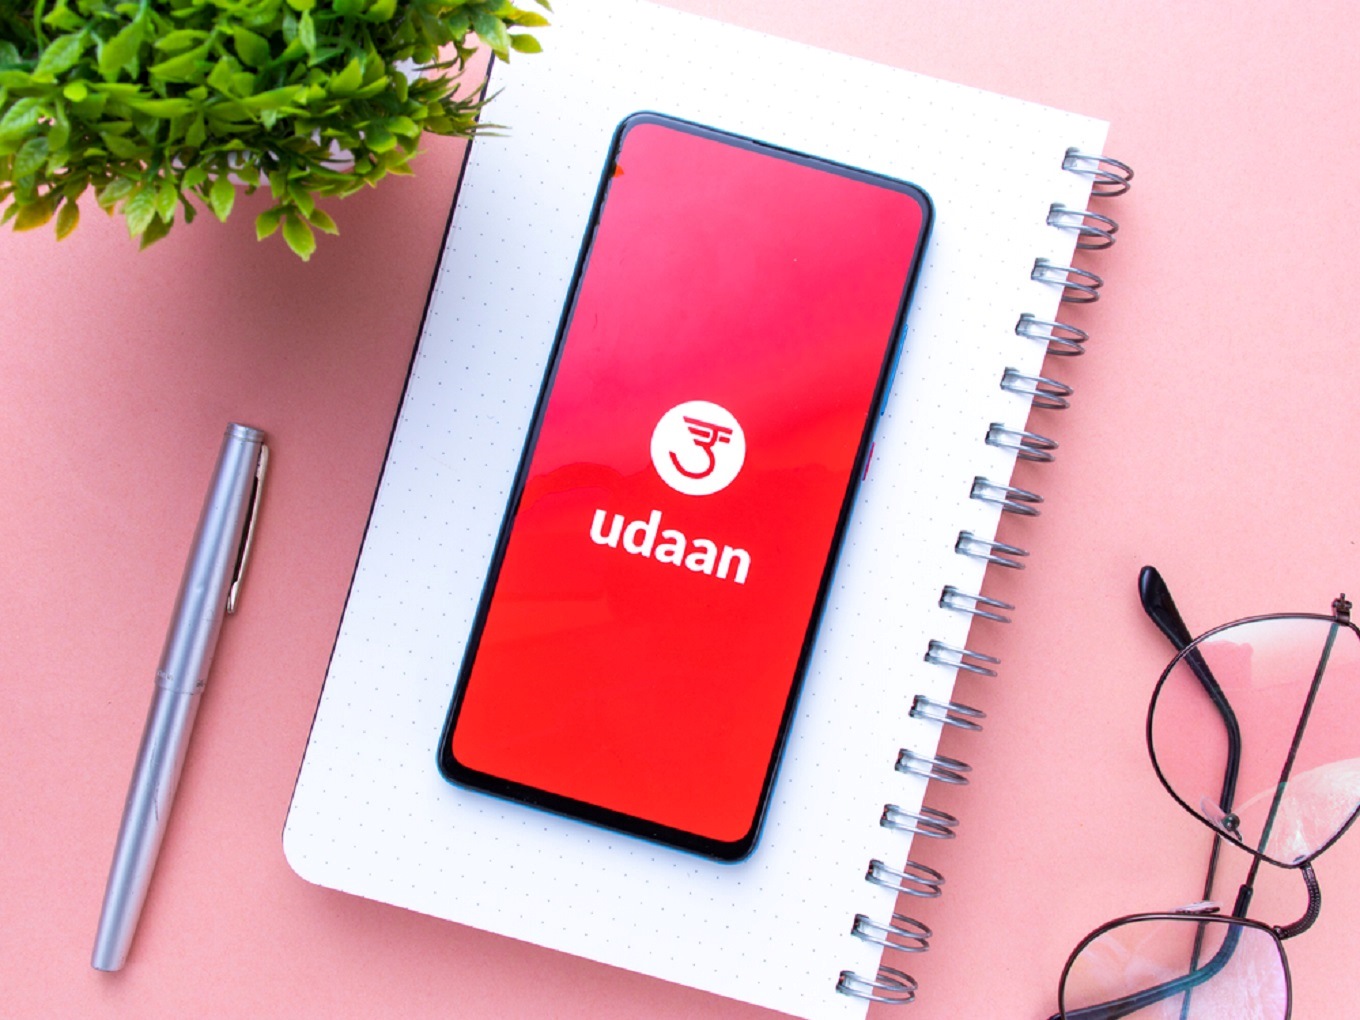 udaan-secures-340-million-in-new-funding-led-by-mg